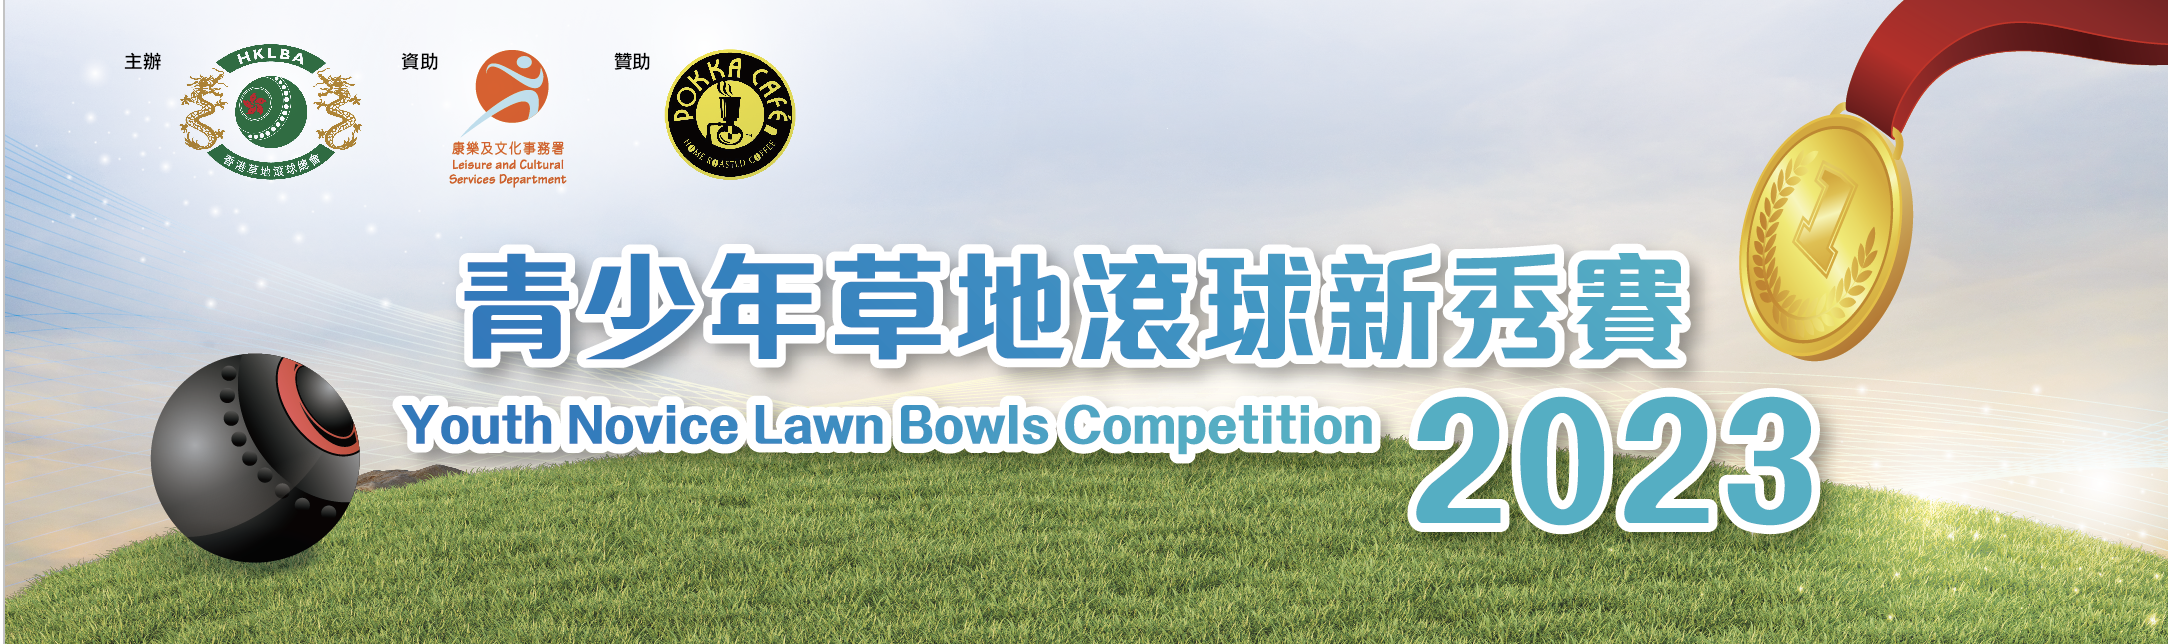 Youth Novice Lawn Bowls Competition 2023 (Updated on 11/4/23)